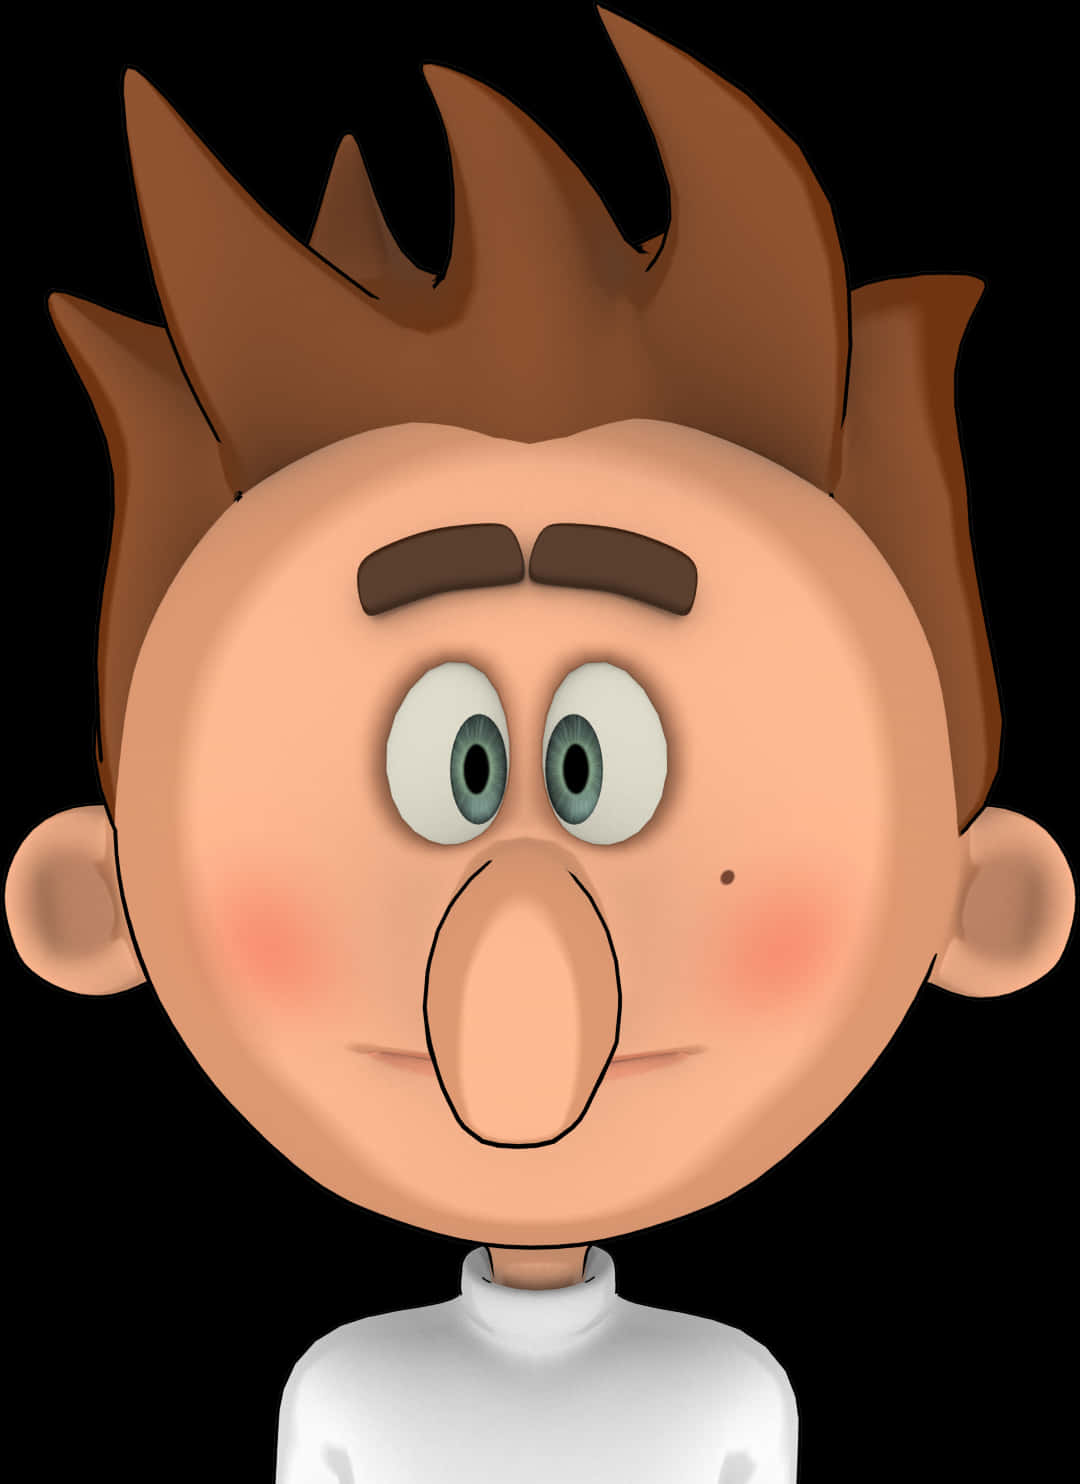 Cartoon Boy Surprised Expression PNG